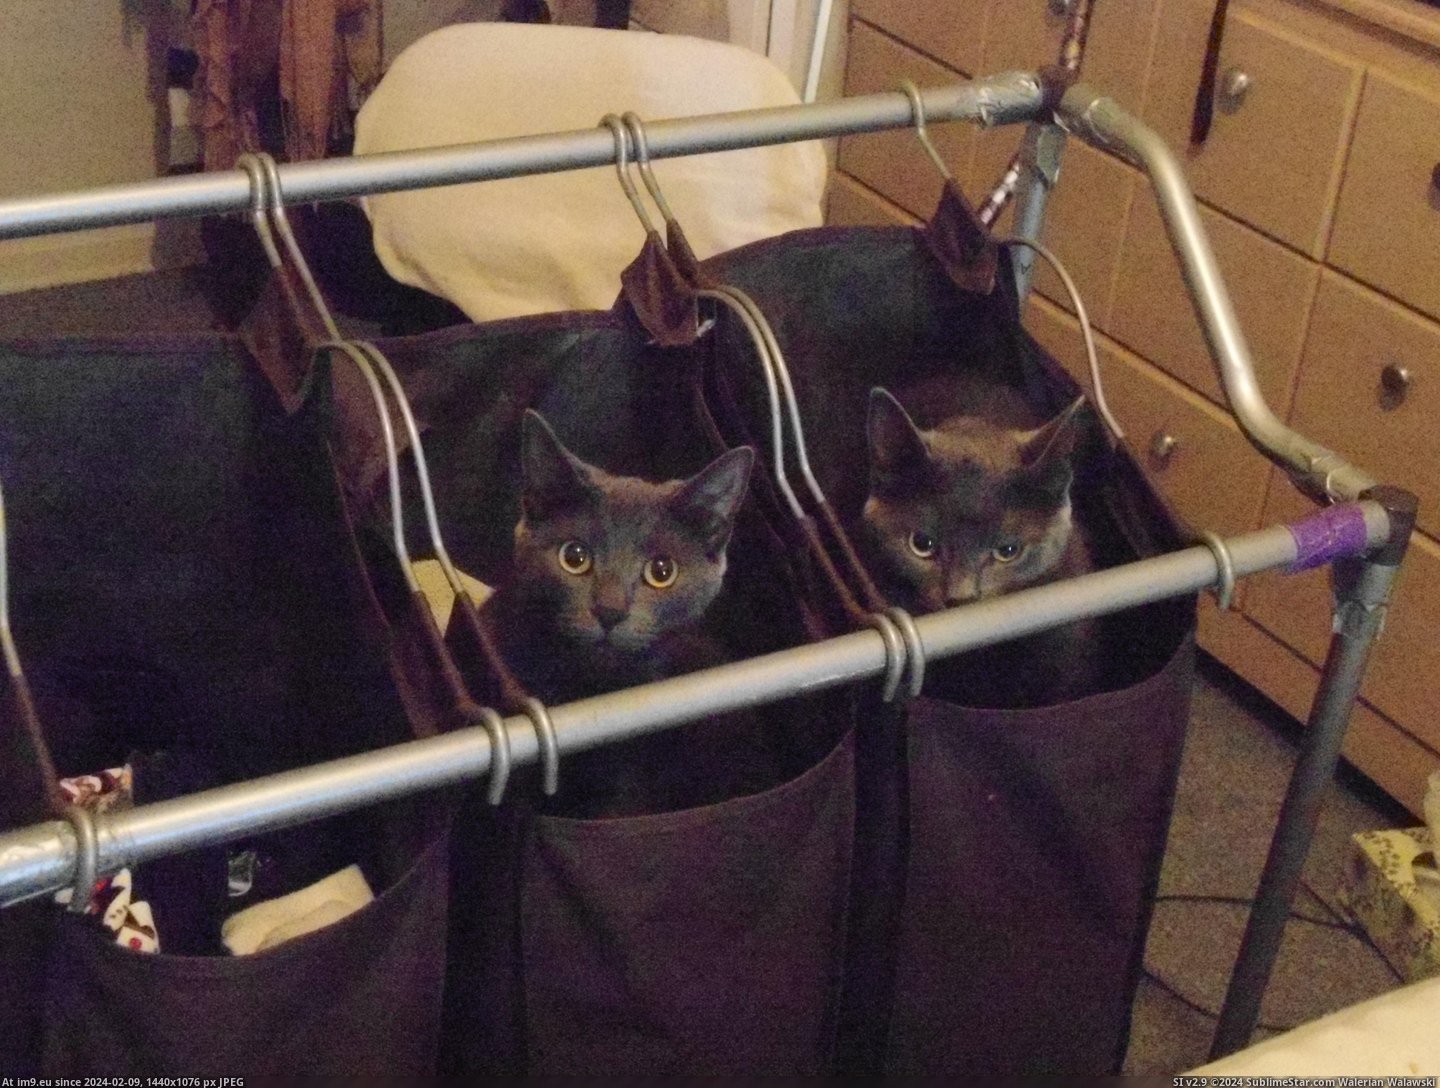 #One #Twin #Evil #Guess [Aww] Can you guess which one is the evil twin? Pic. (Изображение из альбом My r/AWW favs))